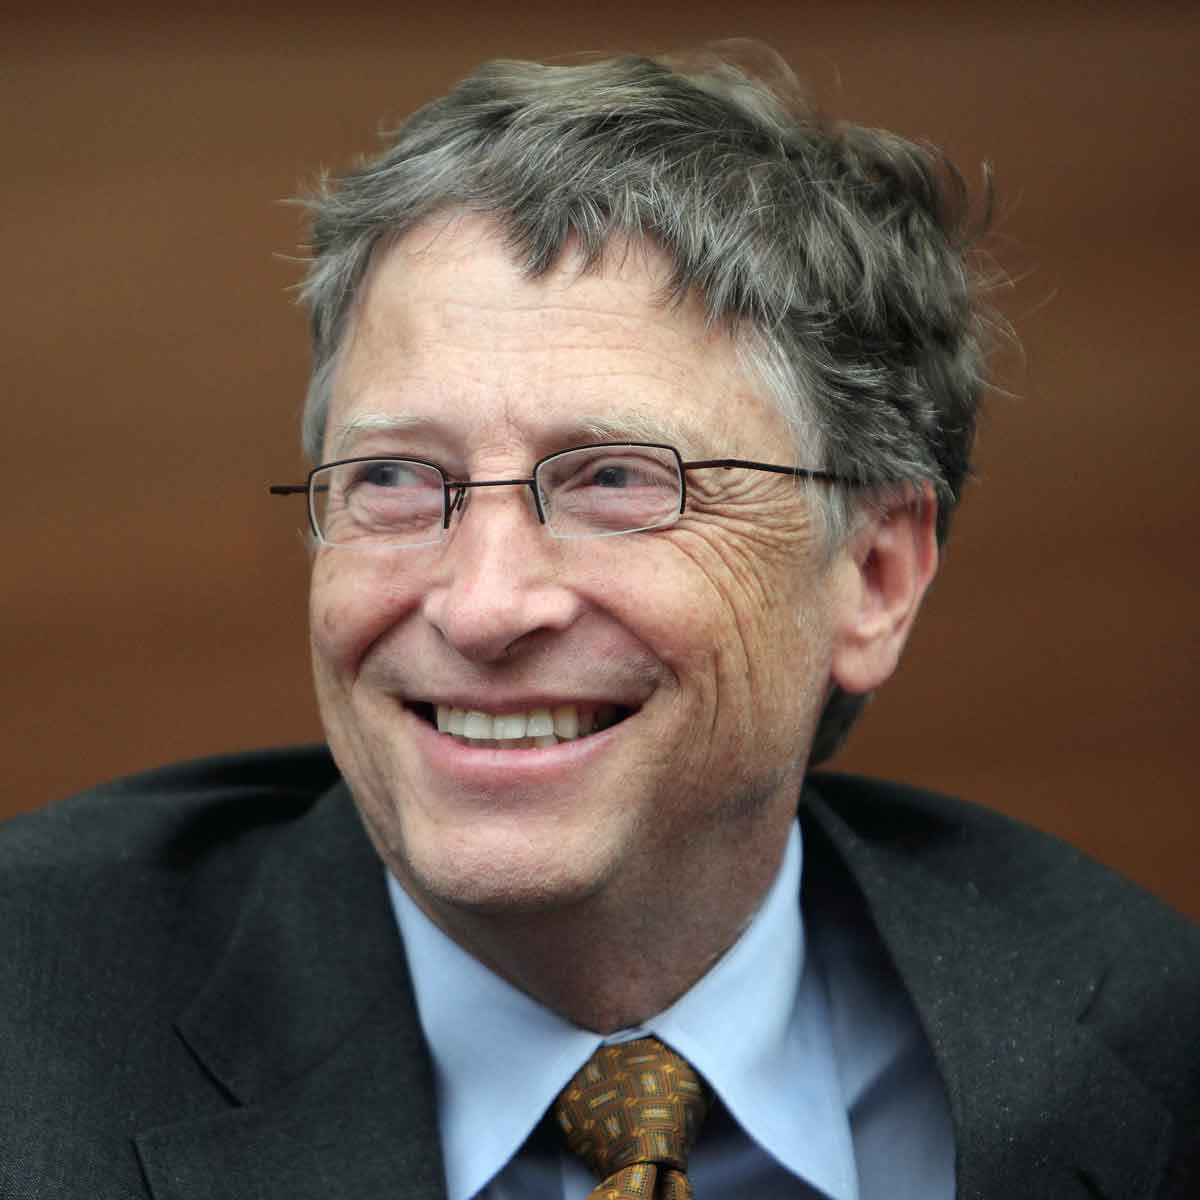 The psychological profile of Bill Gates.